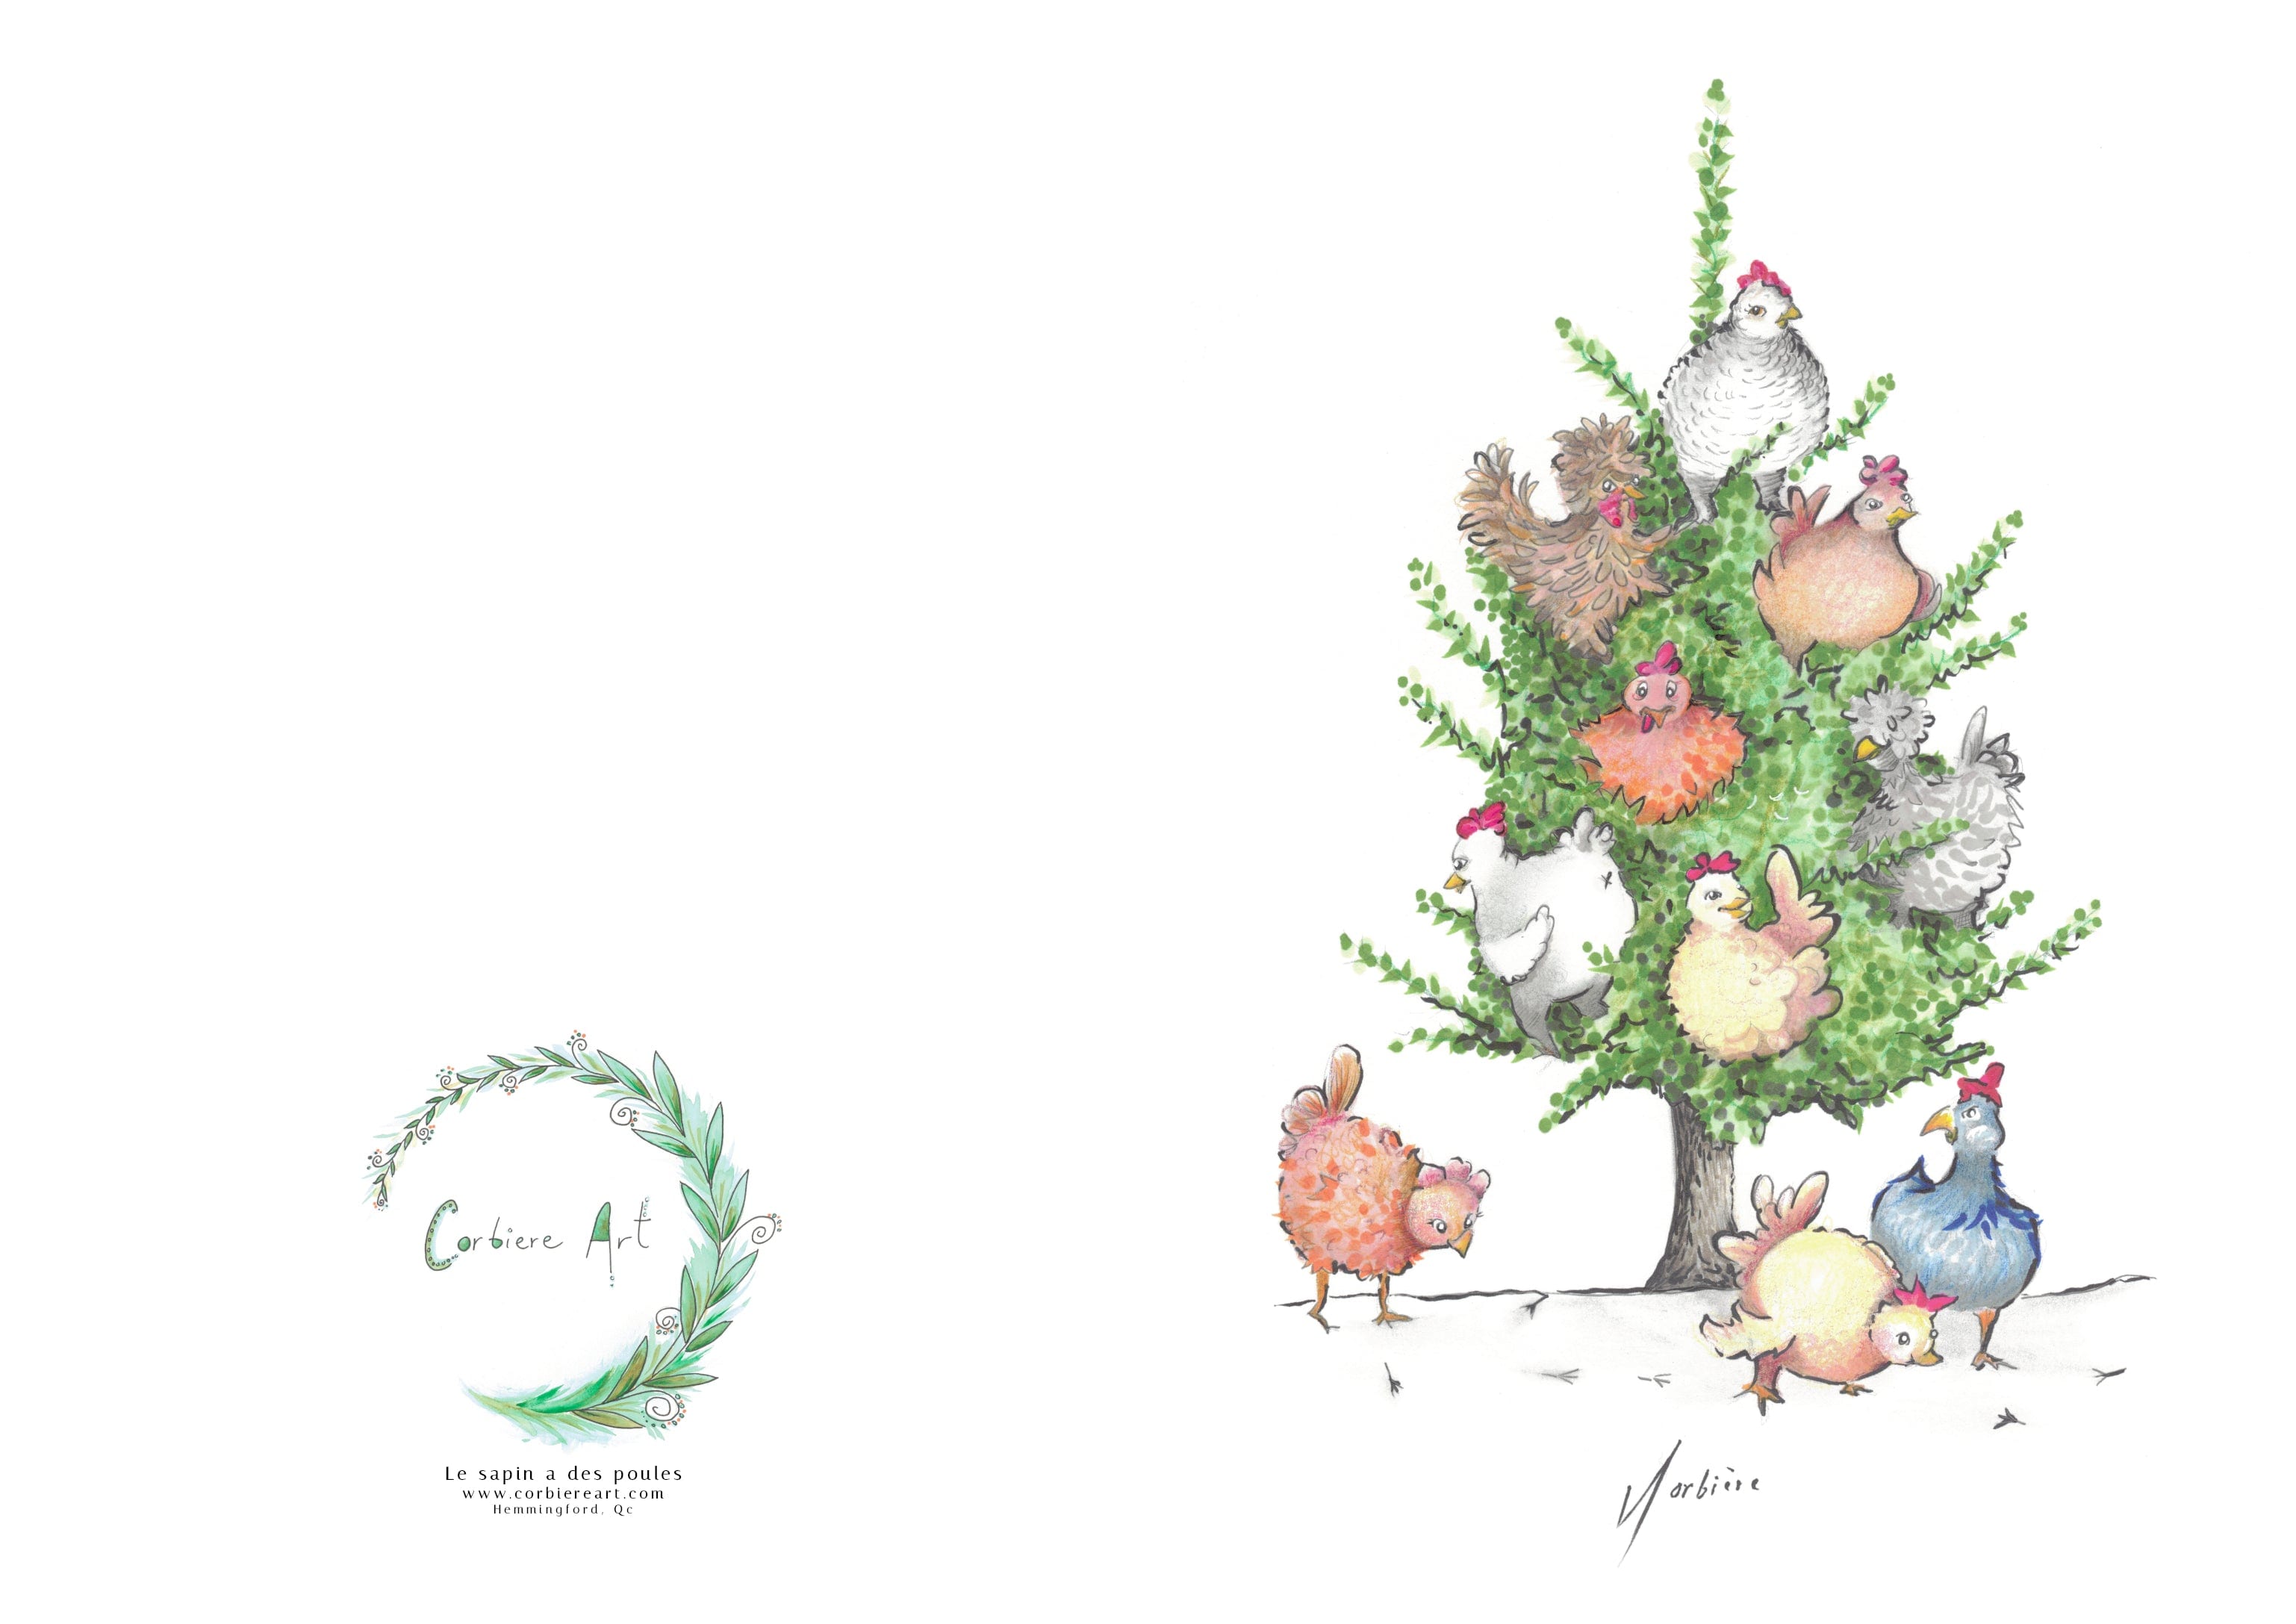 Greeting card - The tree has hens